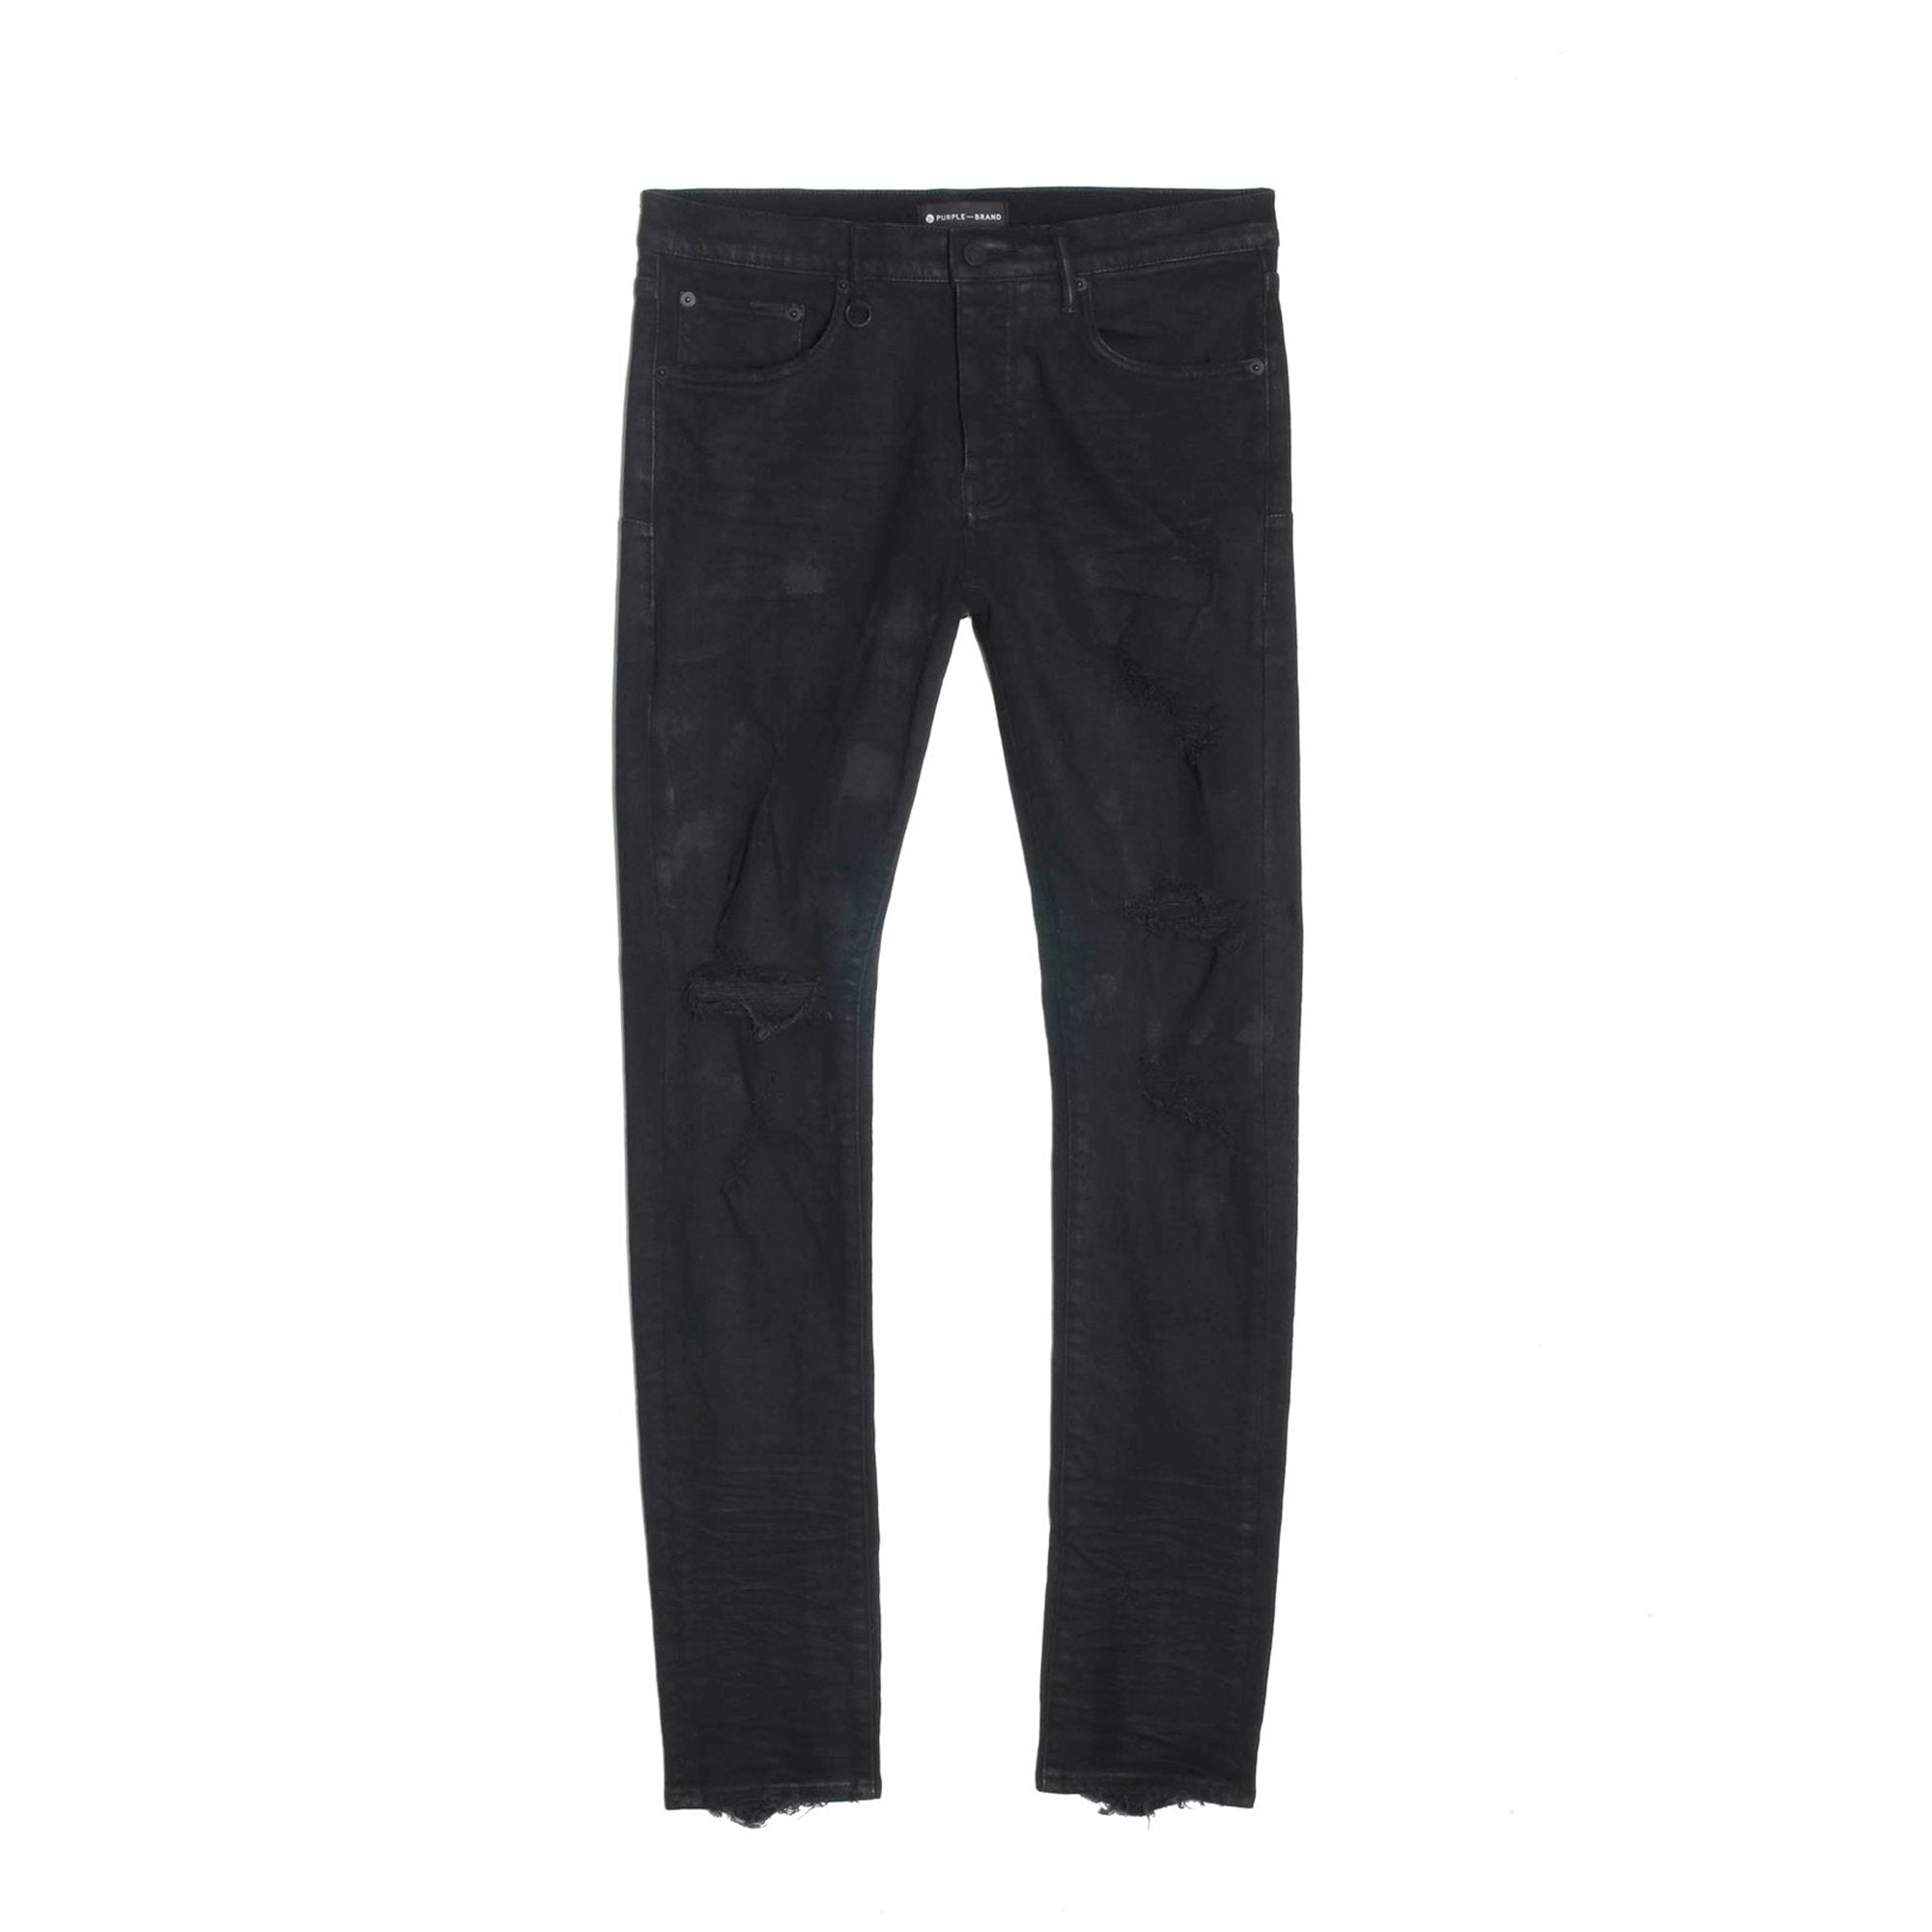 Buy PURPLE BRAND P001 Low-rise Skinny Waxed Jeans - Waxed Mechanic Indi  Blowout At 76% Off